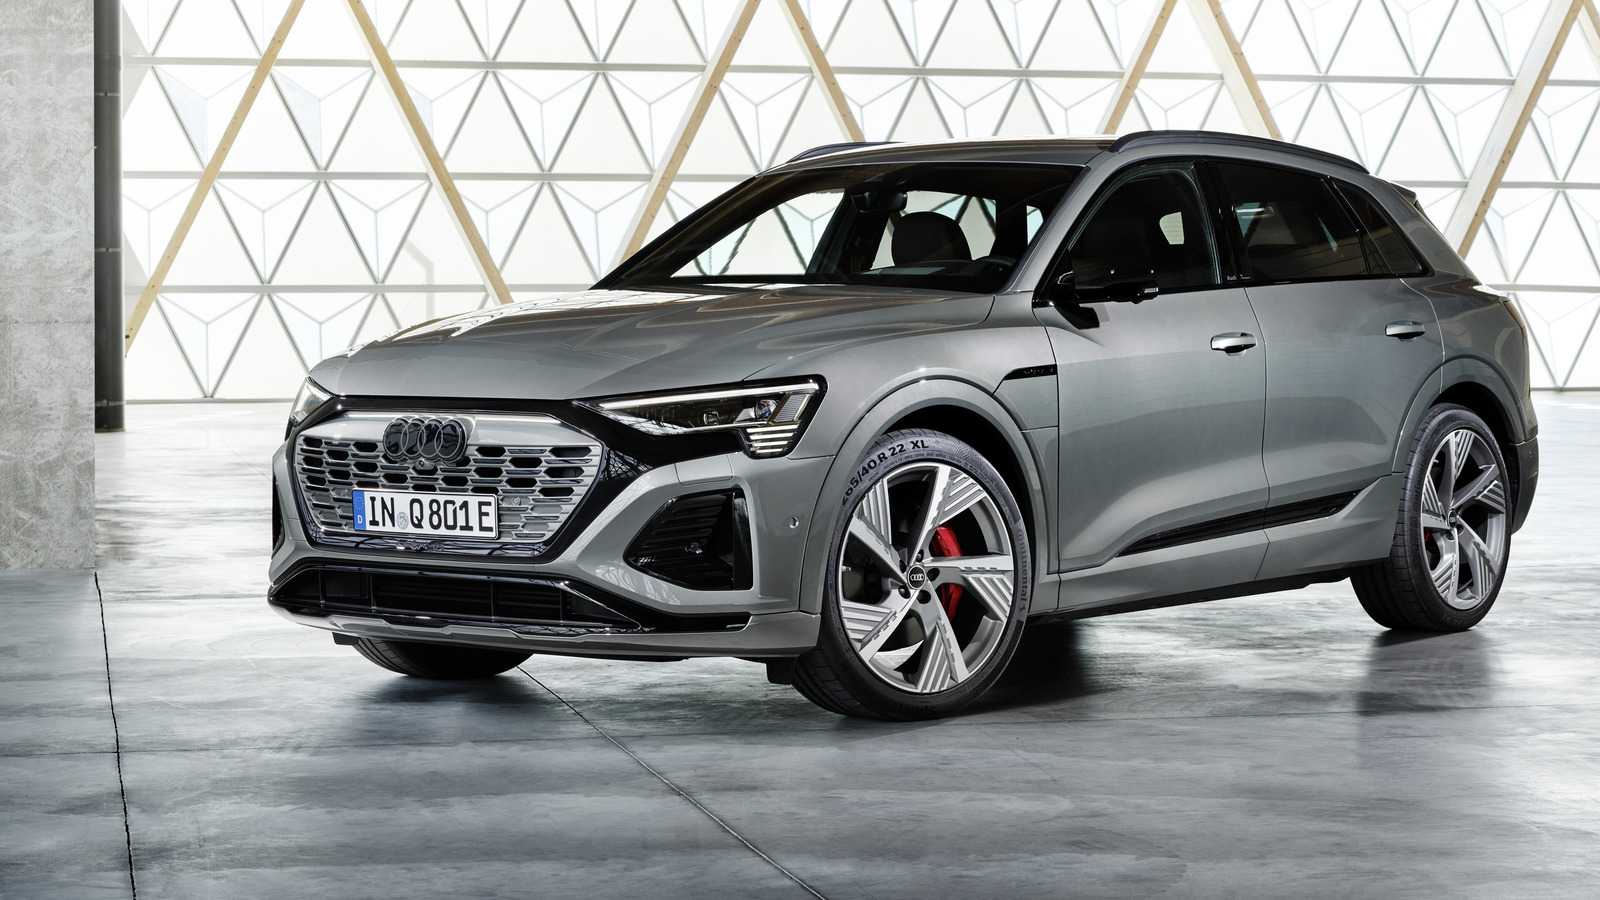 2024 Audi Q8 ETron Gives Electric SUV A New Name, More Range, More...